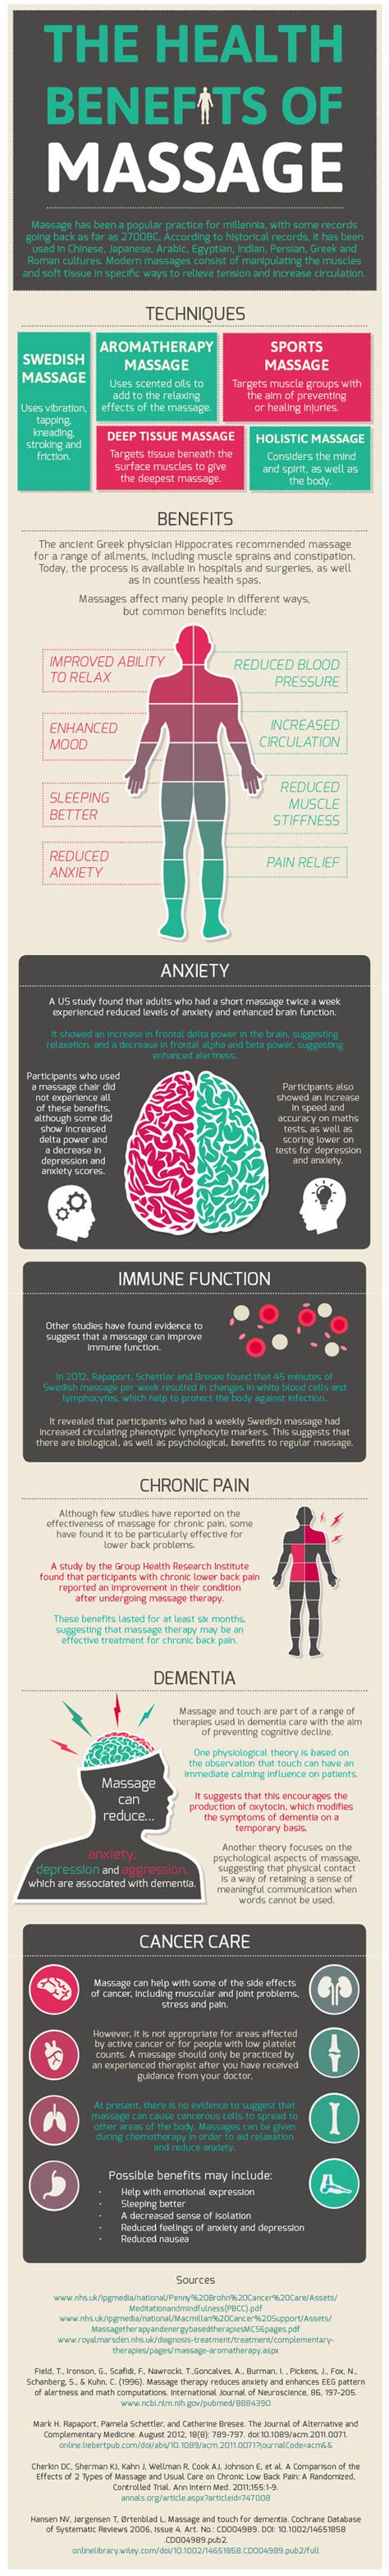 The Health Benefits Of Massage Infographic Blog Infographic